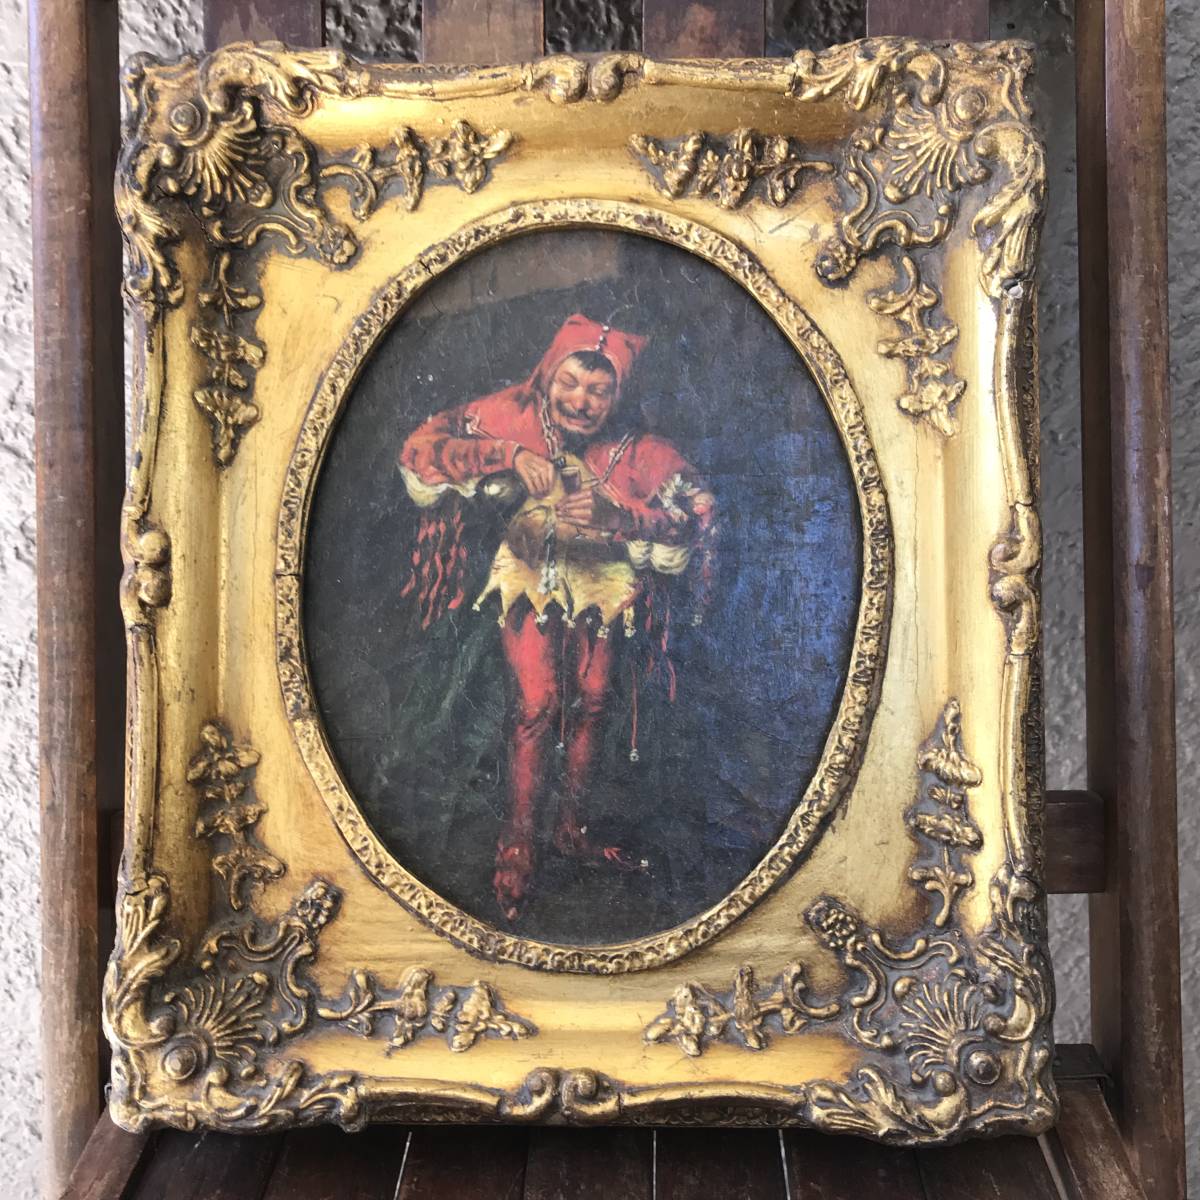 Rare item!Very Old 19th Century Antique Painting Oil Painting Jester Clown / England Medieval Europe Europe France Flea Market Eastern Europe Germany Vintage Miscellaneous Goods, painting, oil painting, religious painting